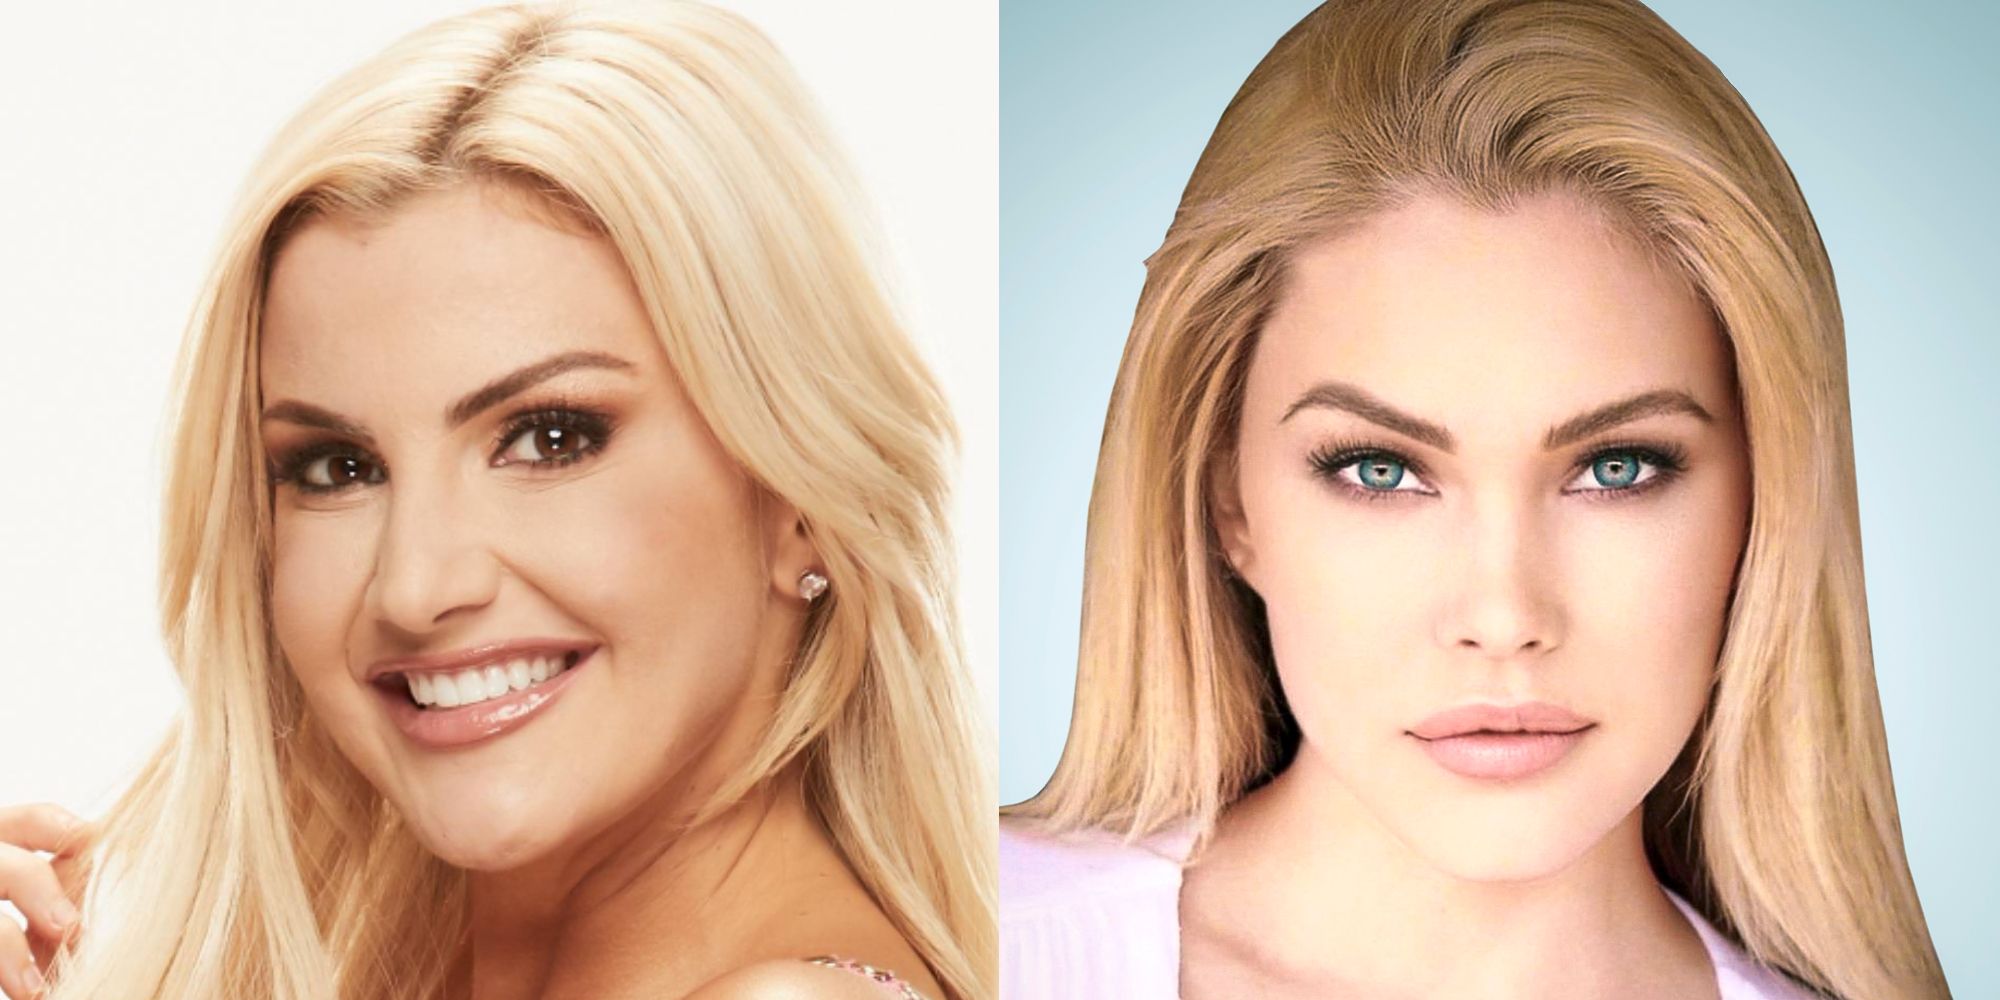 Celebrity Big Brother 3: Kathryn Dunn Throws Shade At Shanna Moakler